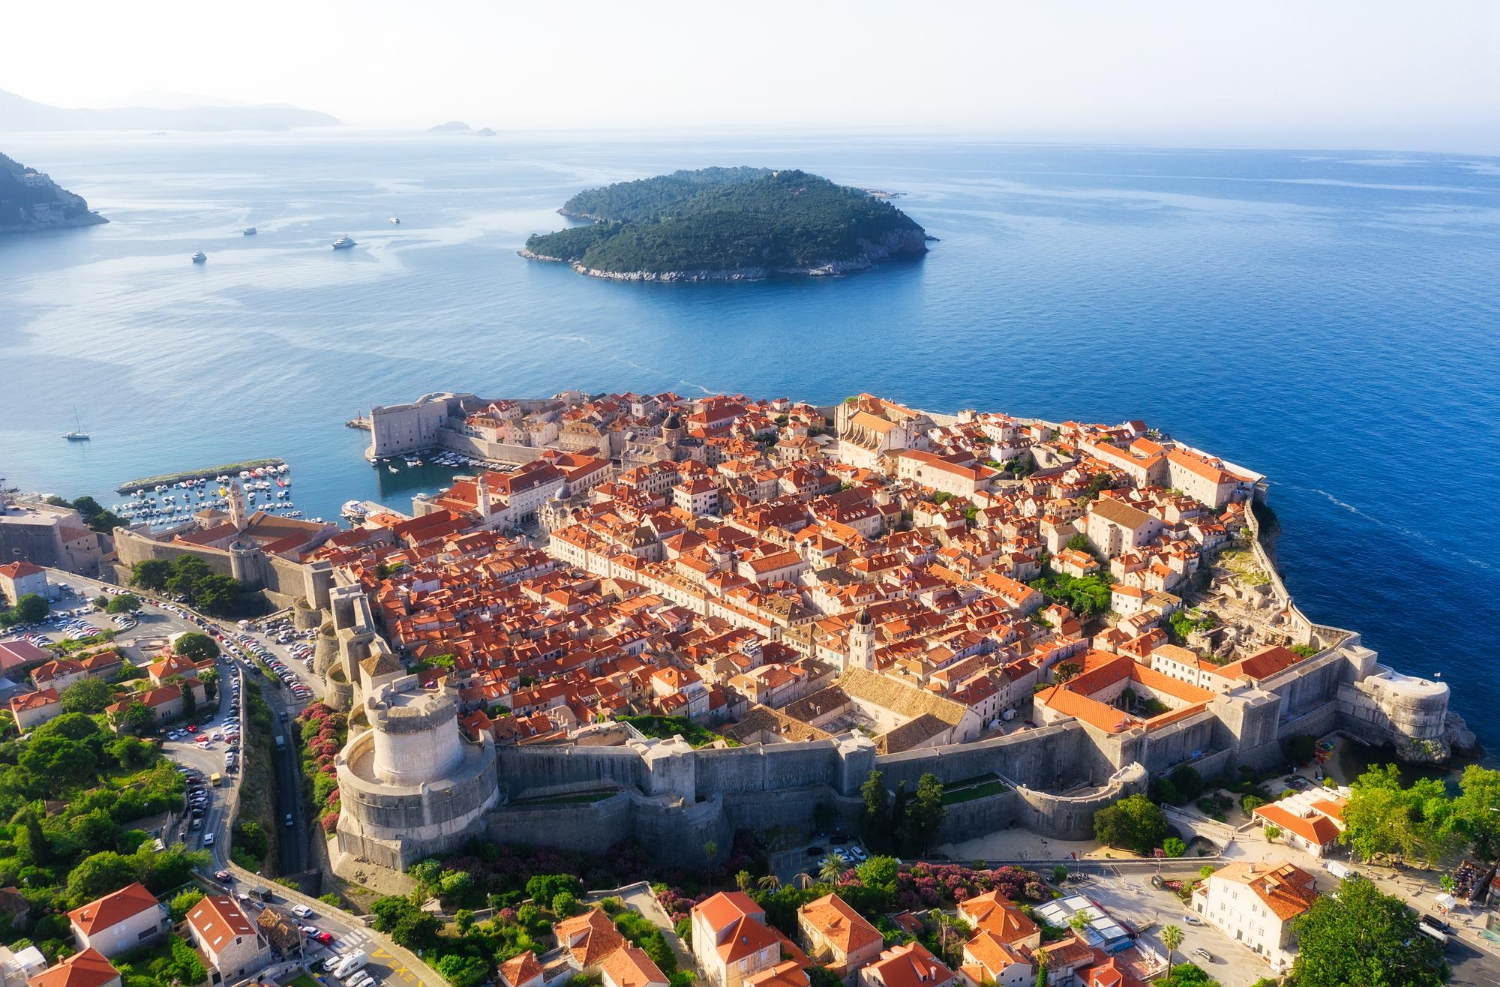 dudrovnik-croatia-aerial-view-old-town-vacation-adventure-town-sea-top-view-from-drone-old-castle-azure-sea-travel-image_1.jpg